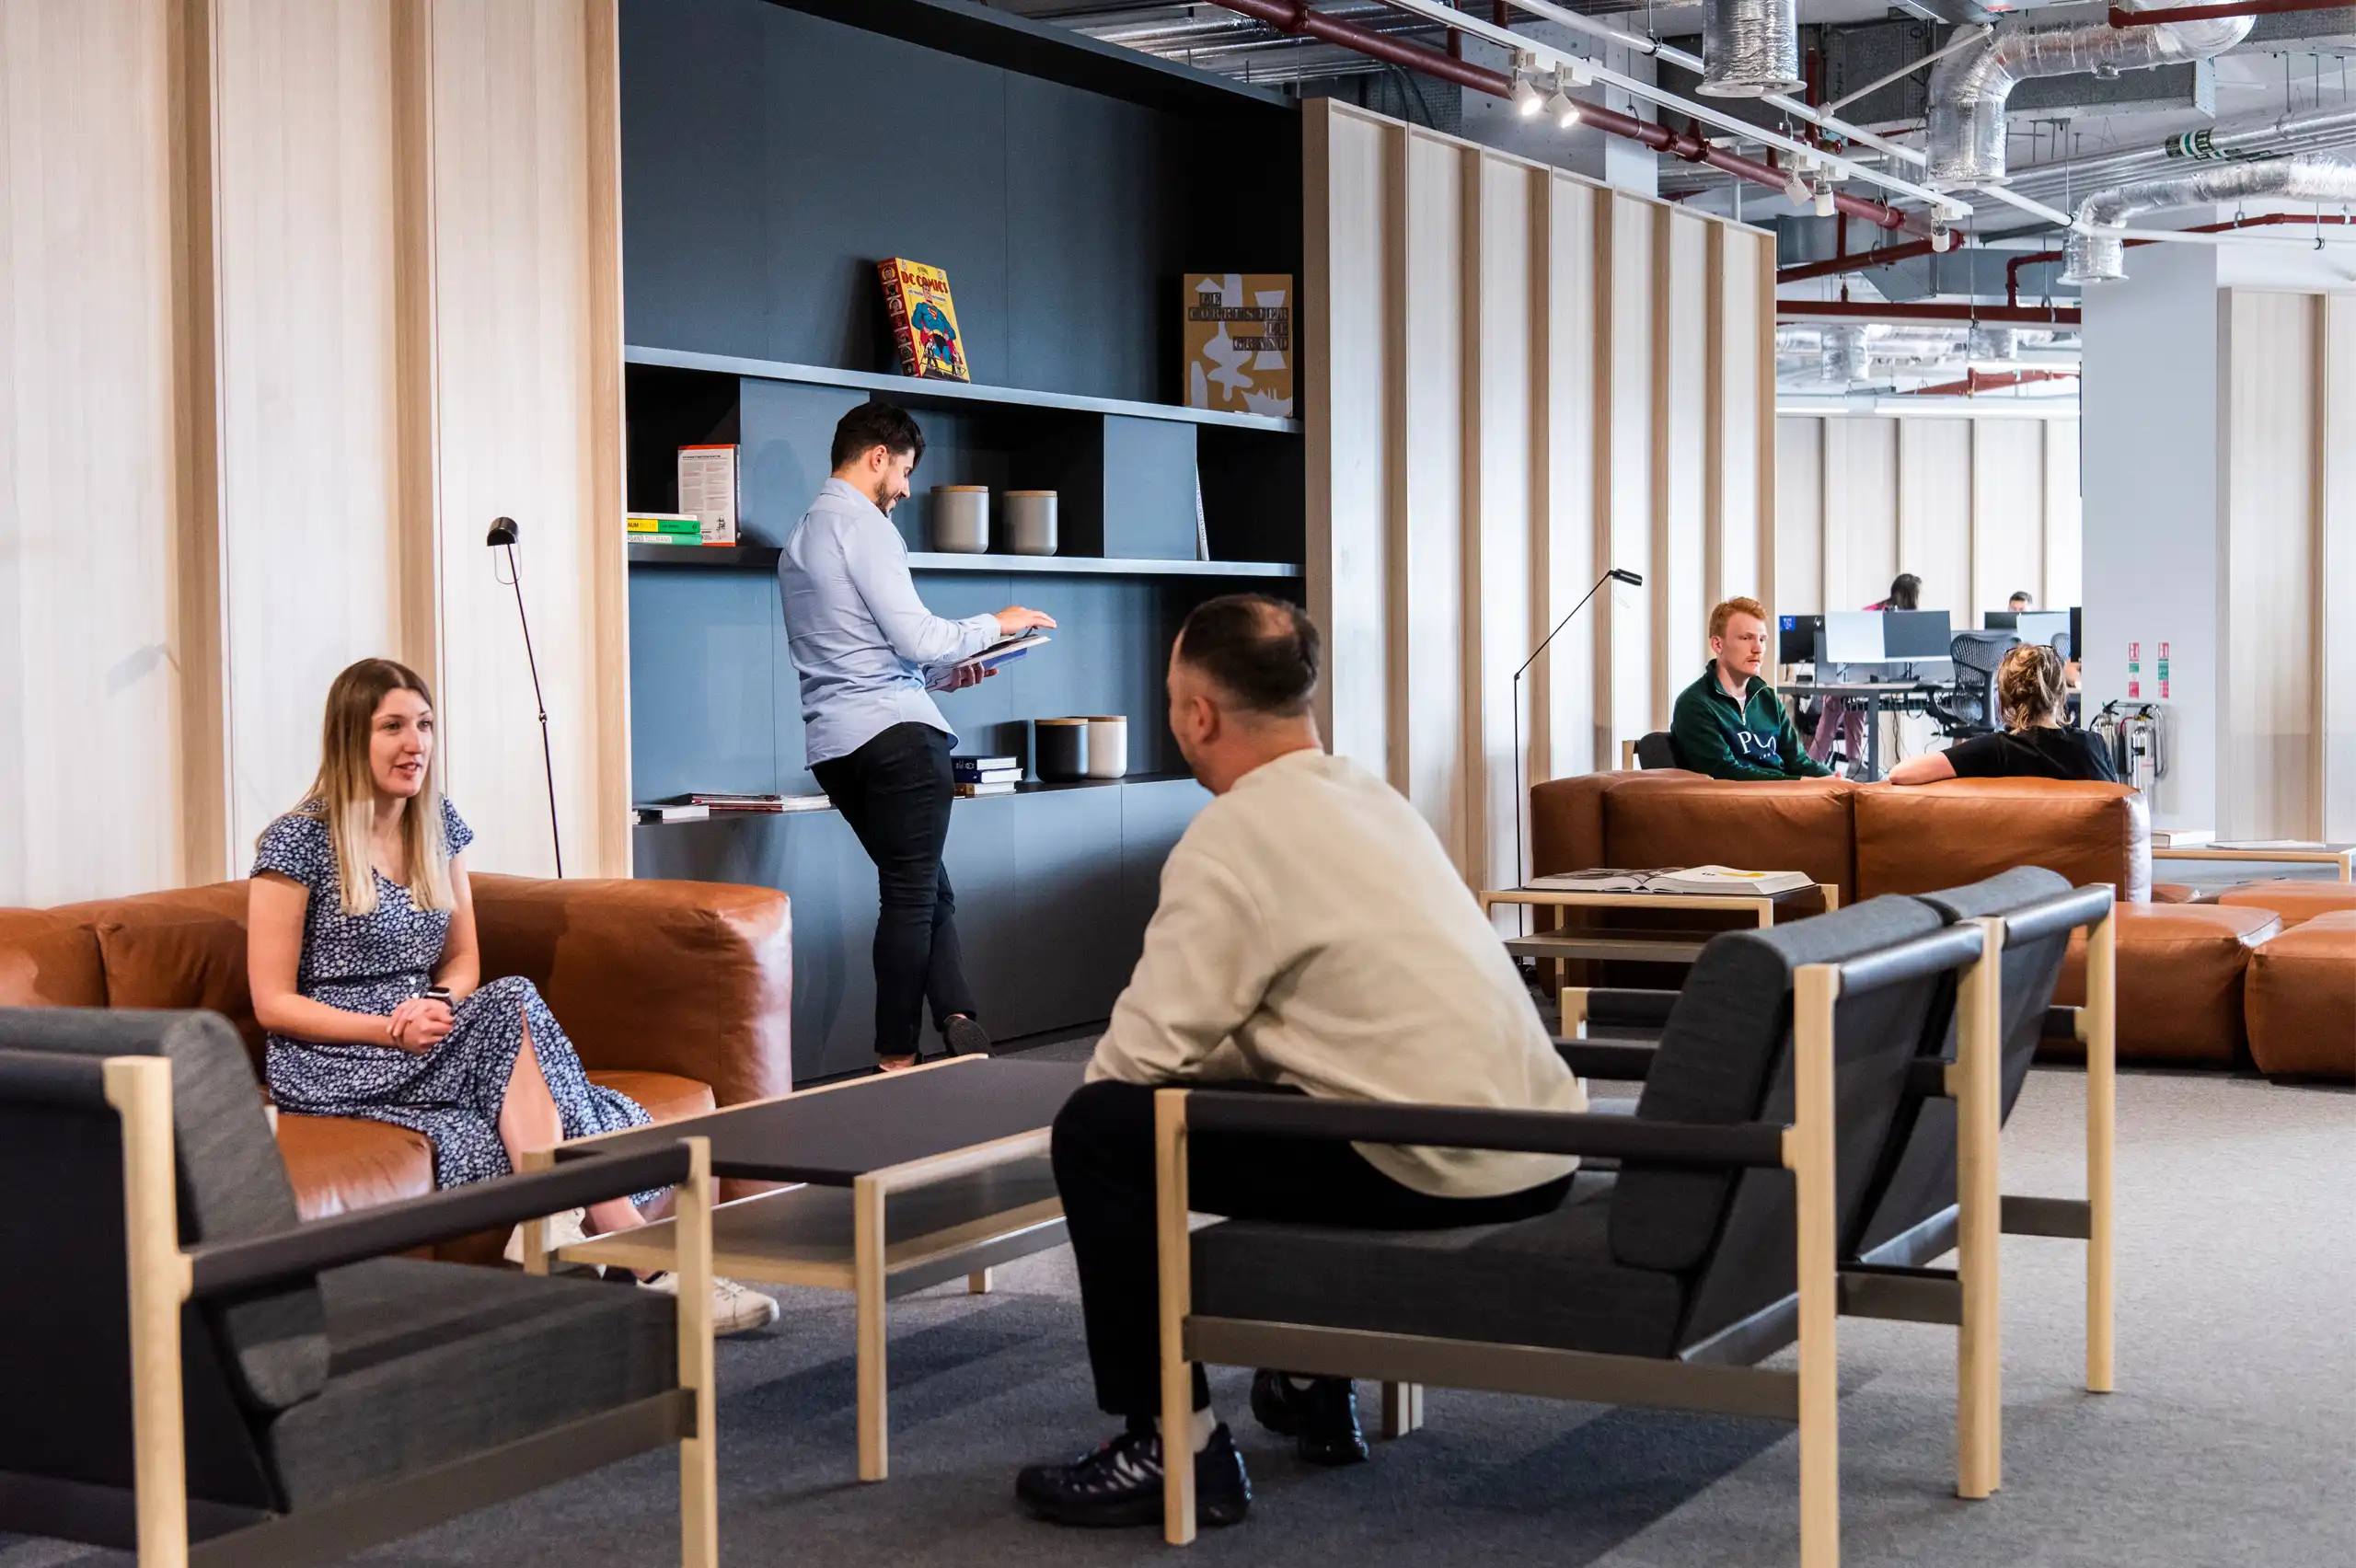 Scaling up: Canary Wharf’s office spaces for growing businesses